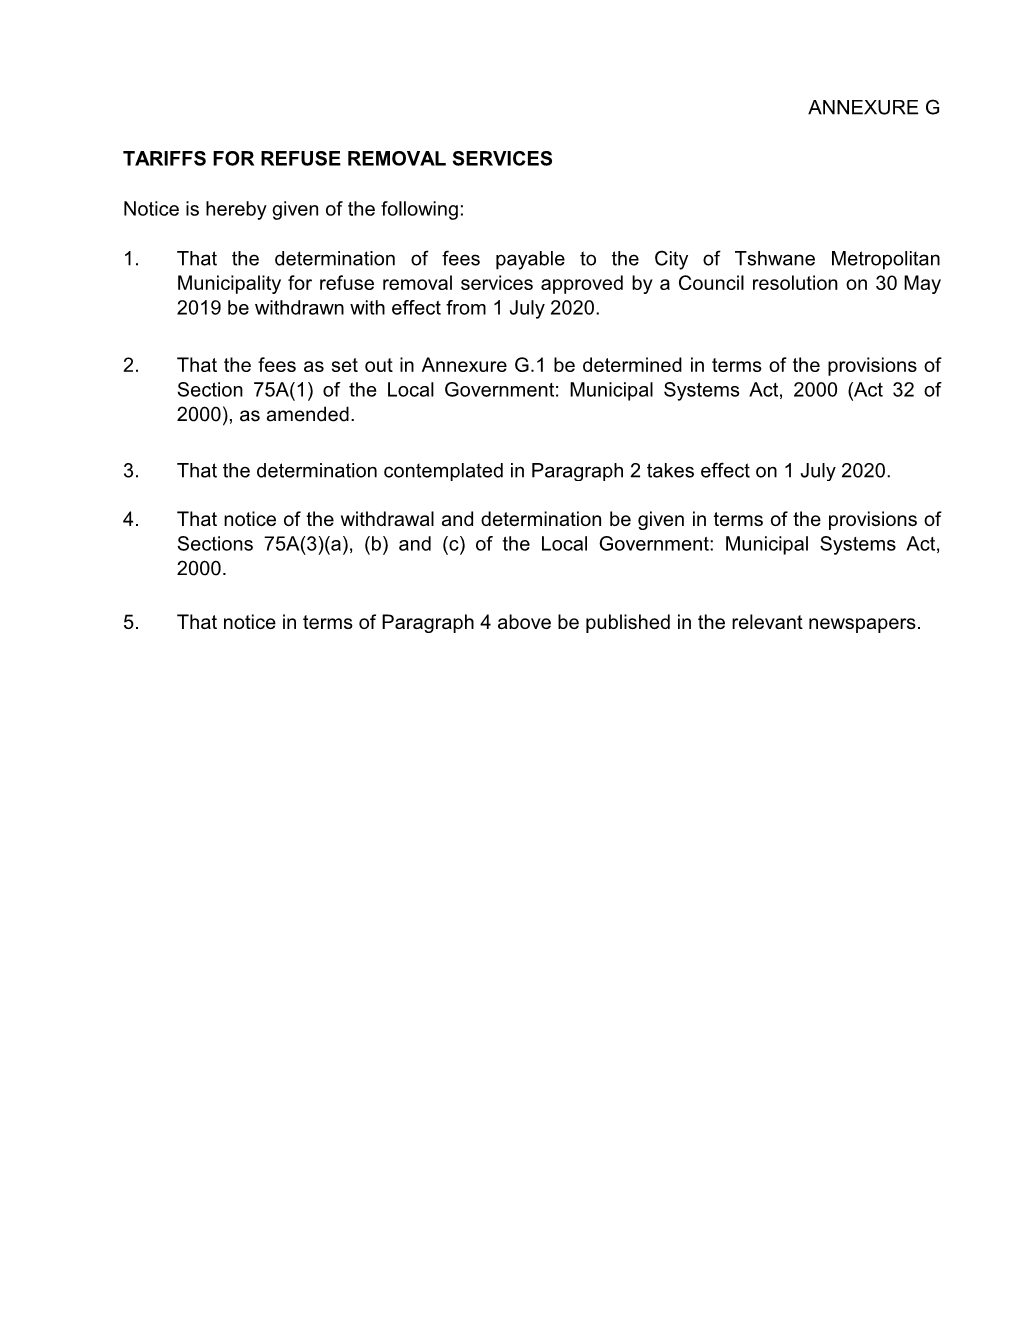 1. That the Determination of Fees Payable to the City of Tshwane